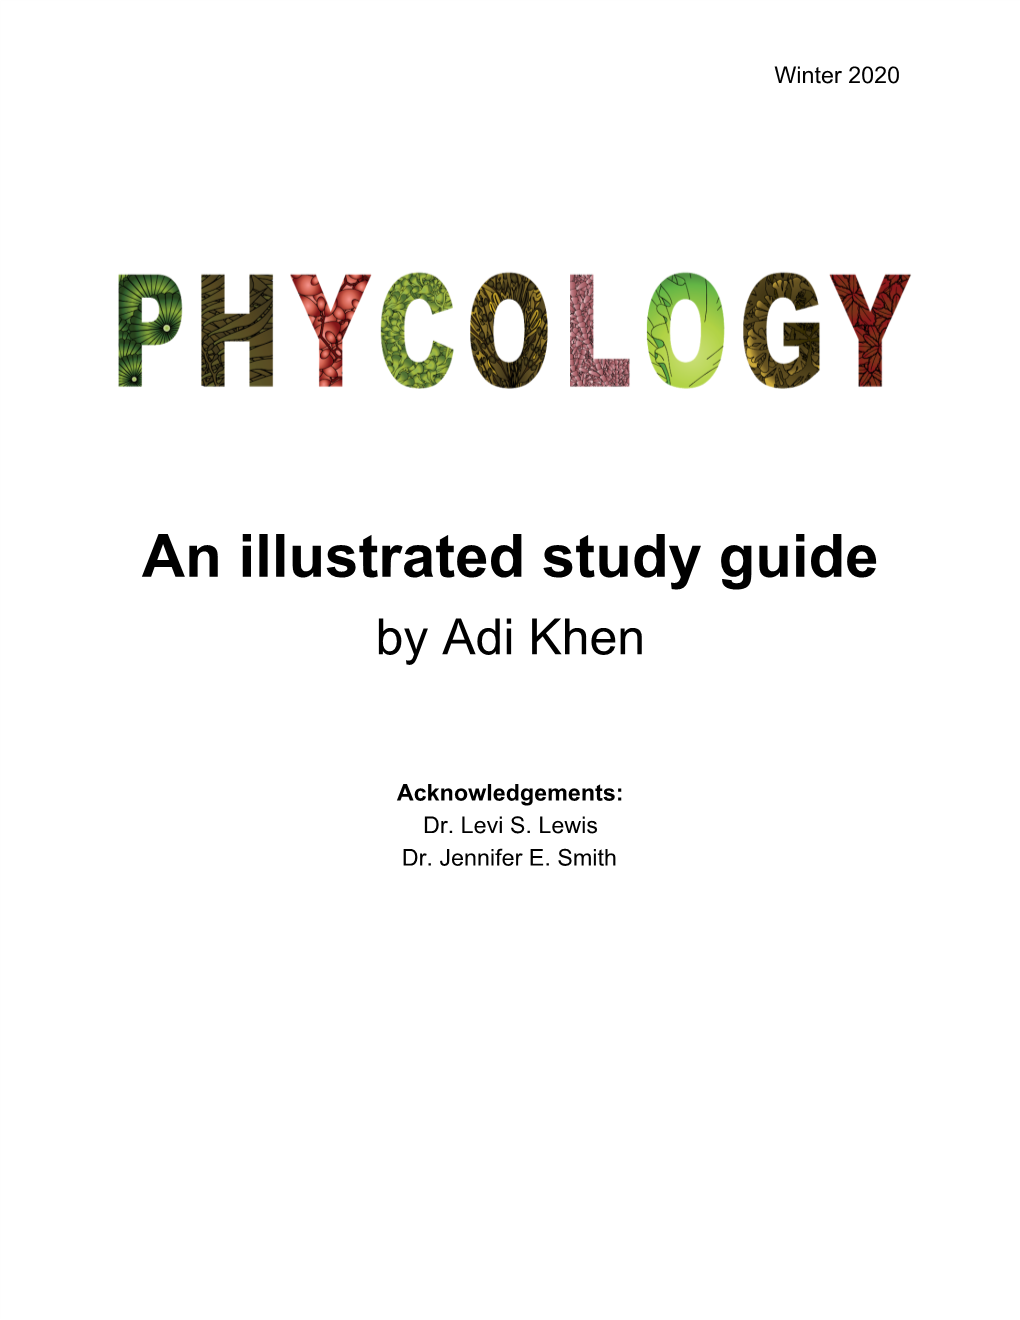 An Illustrated Study Guide by Adi Khen